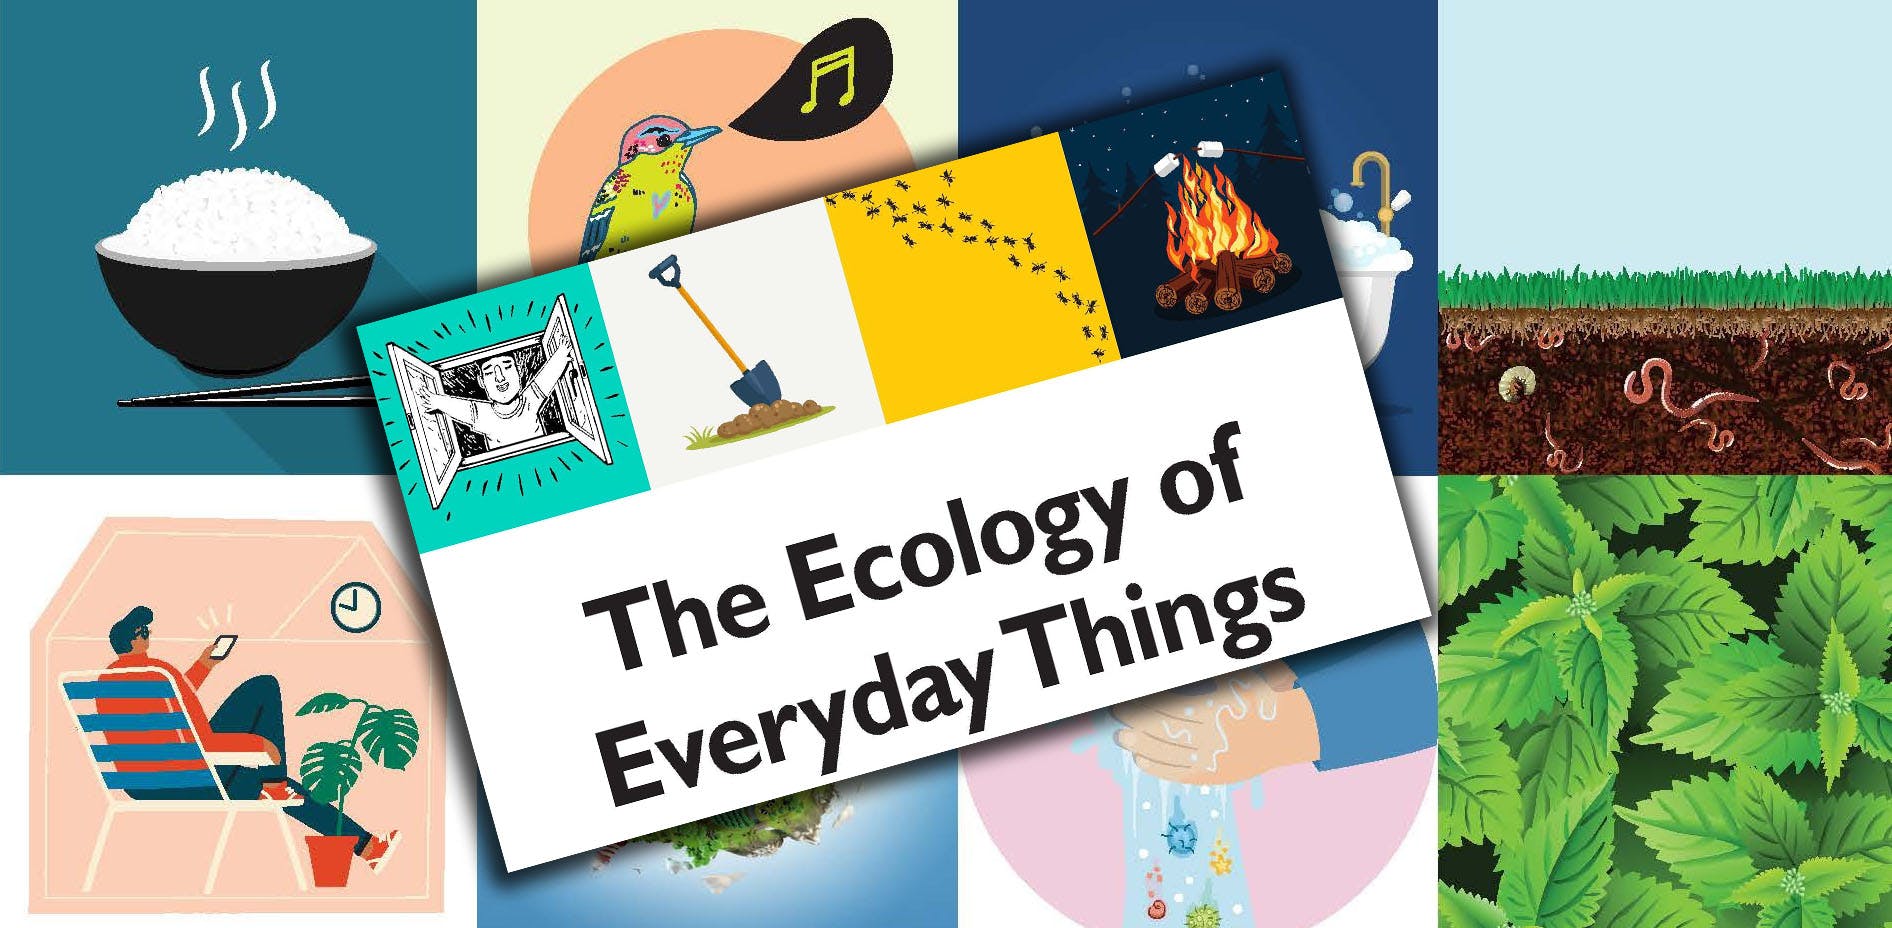 Mark Everard: The Ecology of Everyday Things, CRC Press 2021